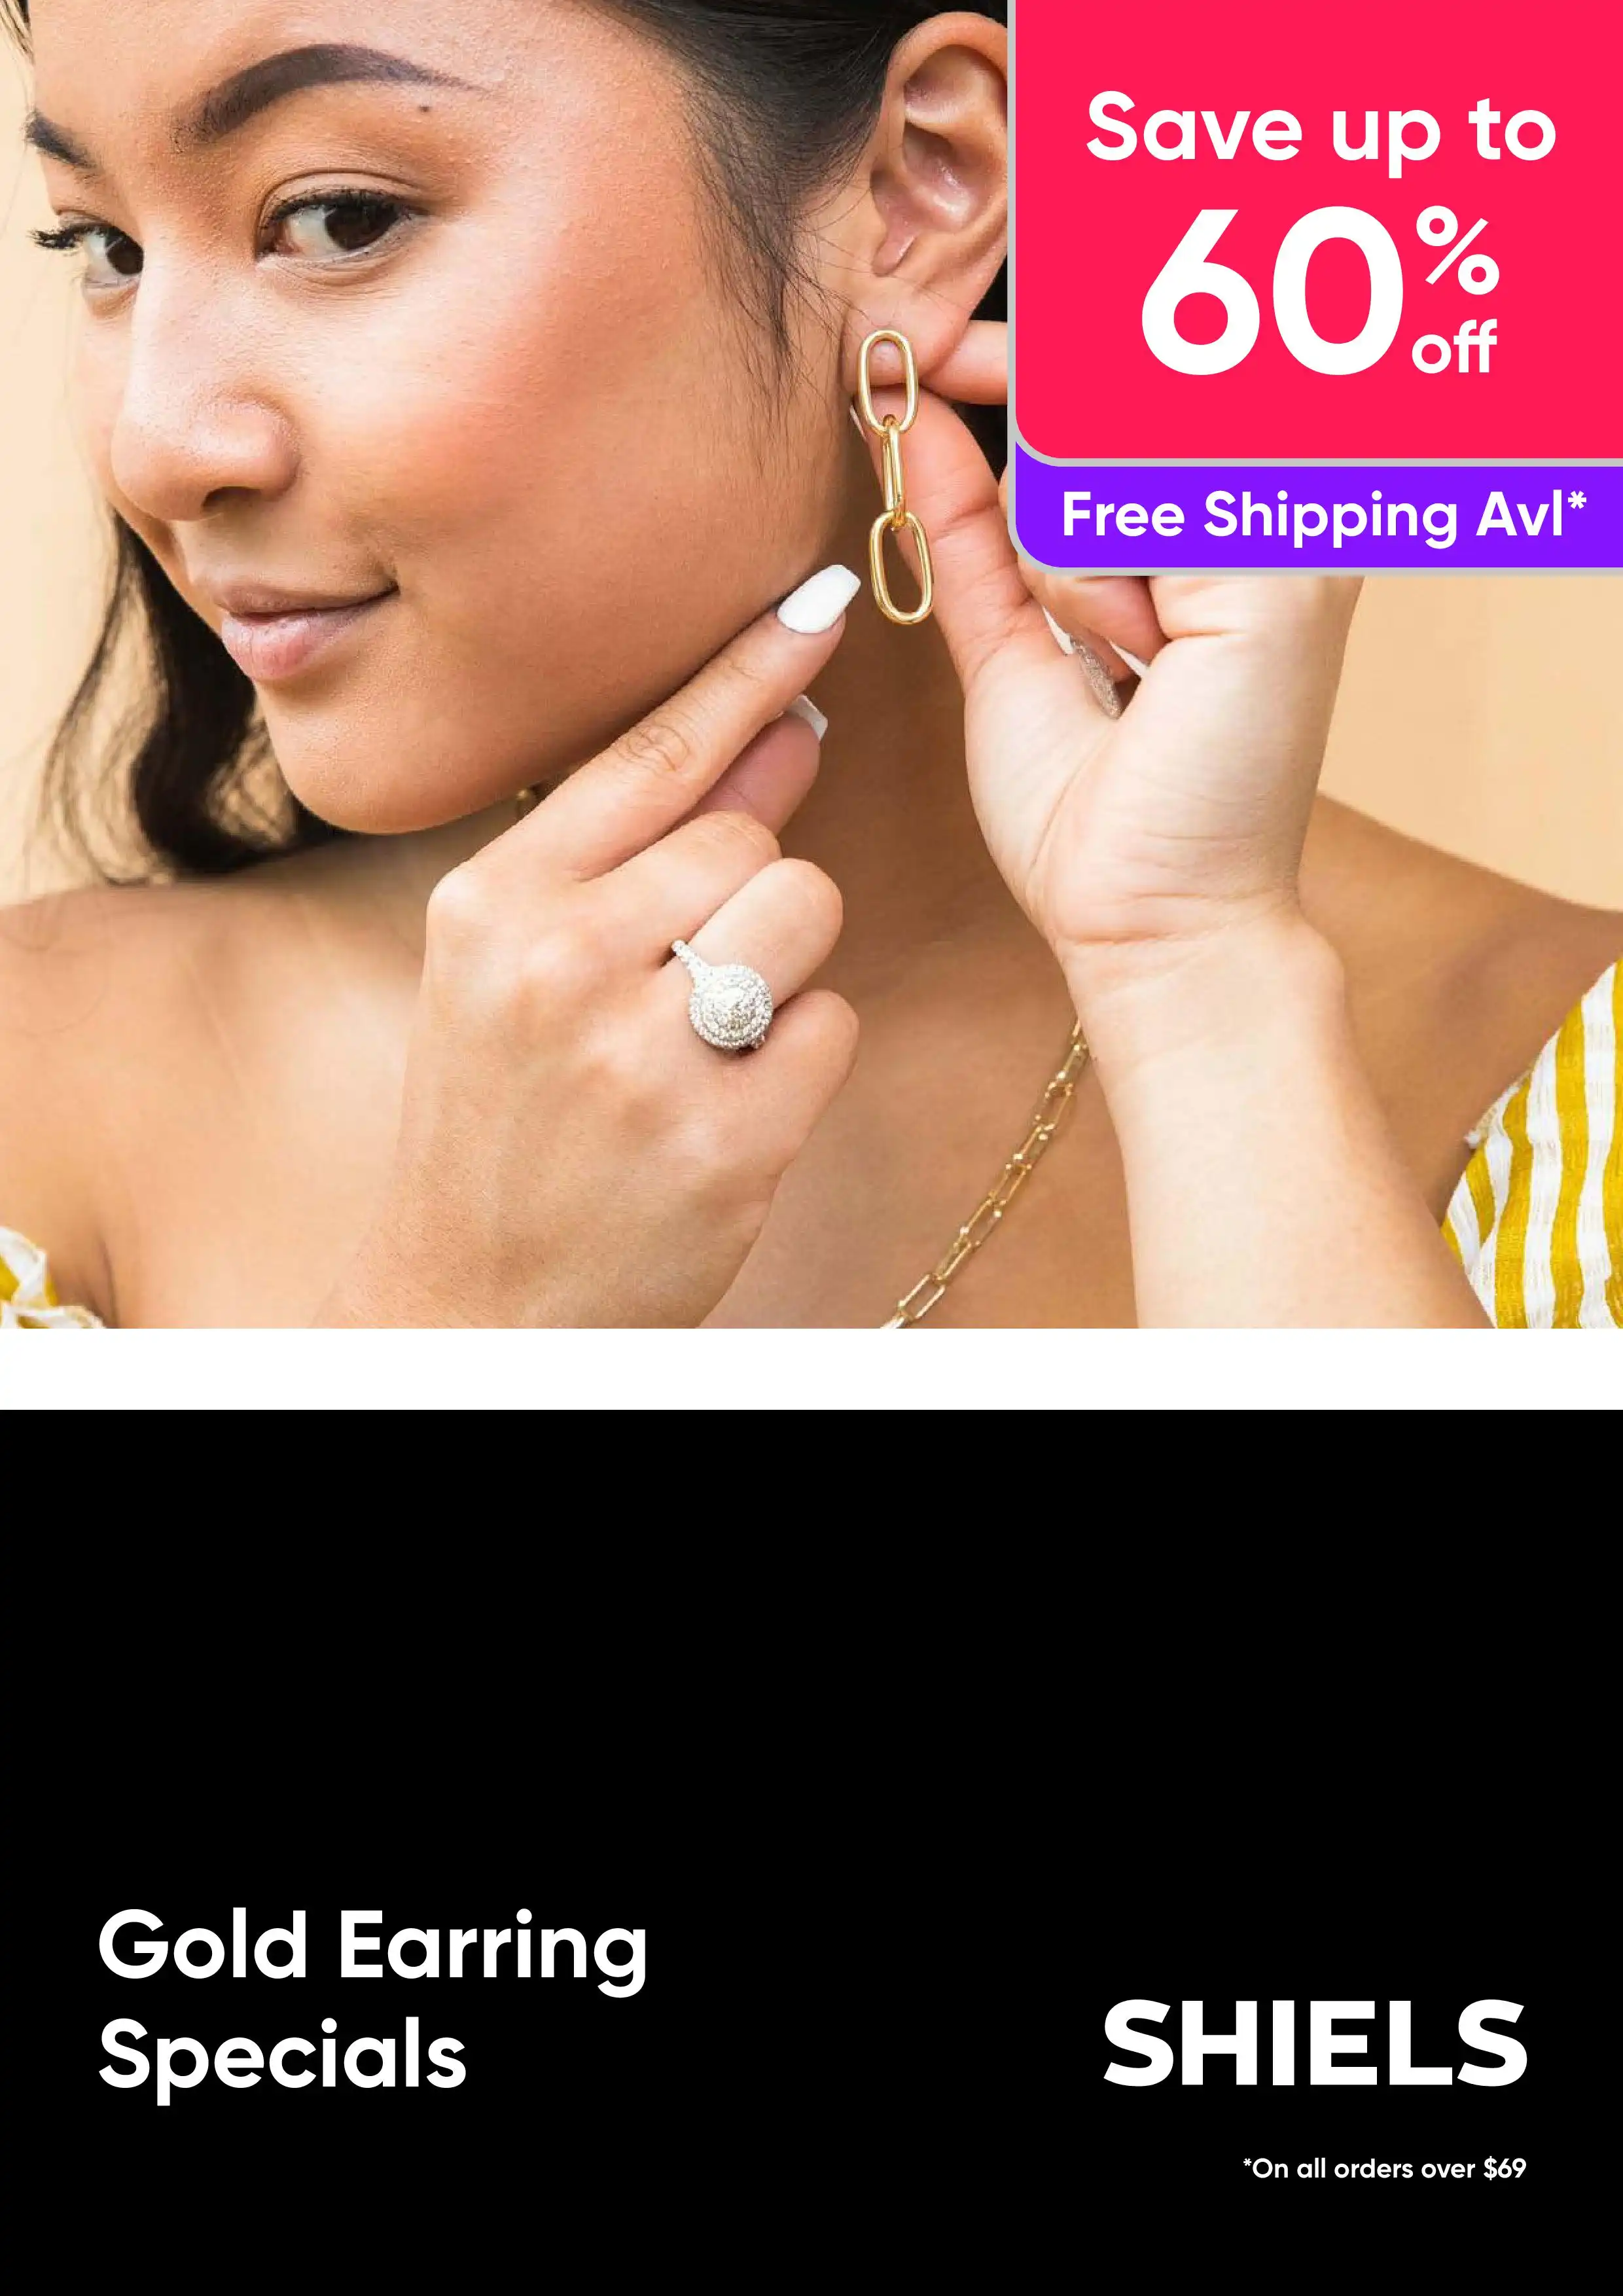 Gold Earrings - Up to 60% Off